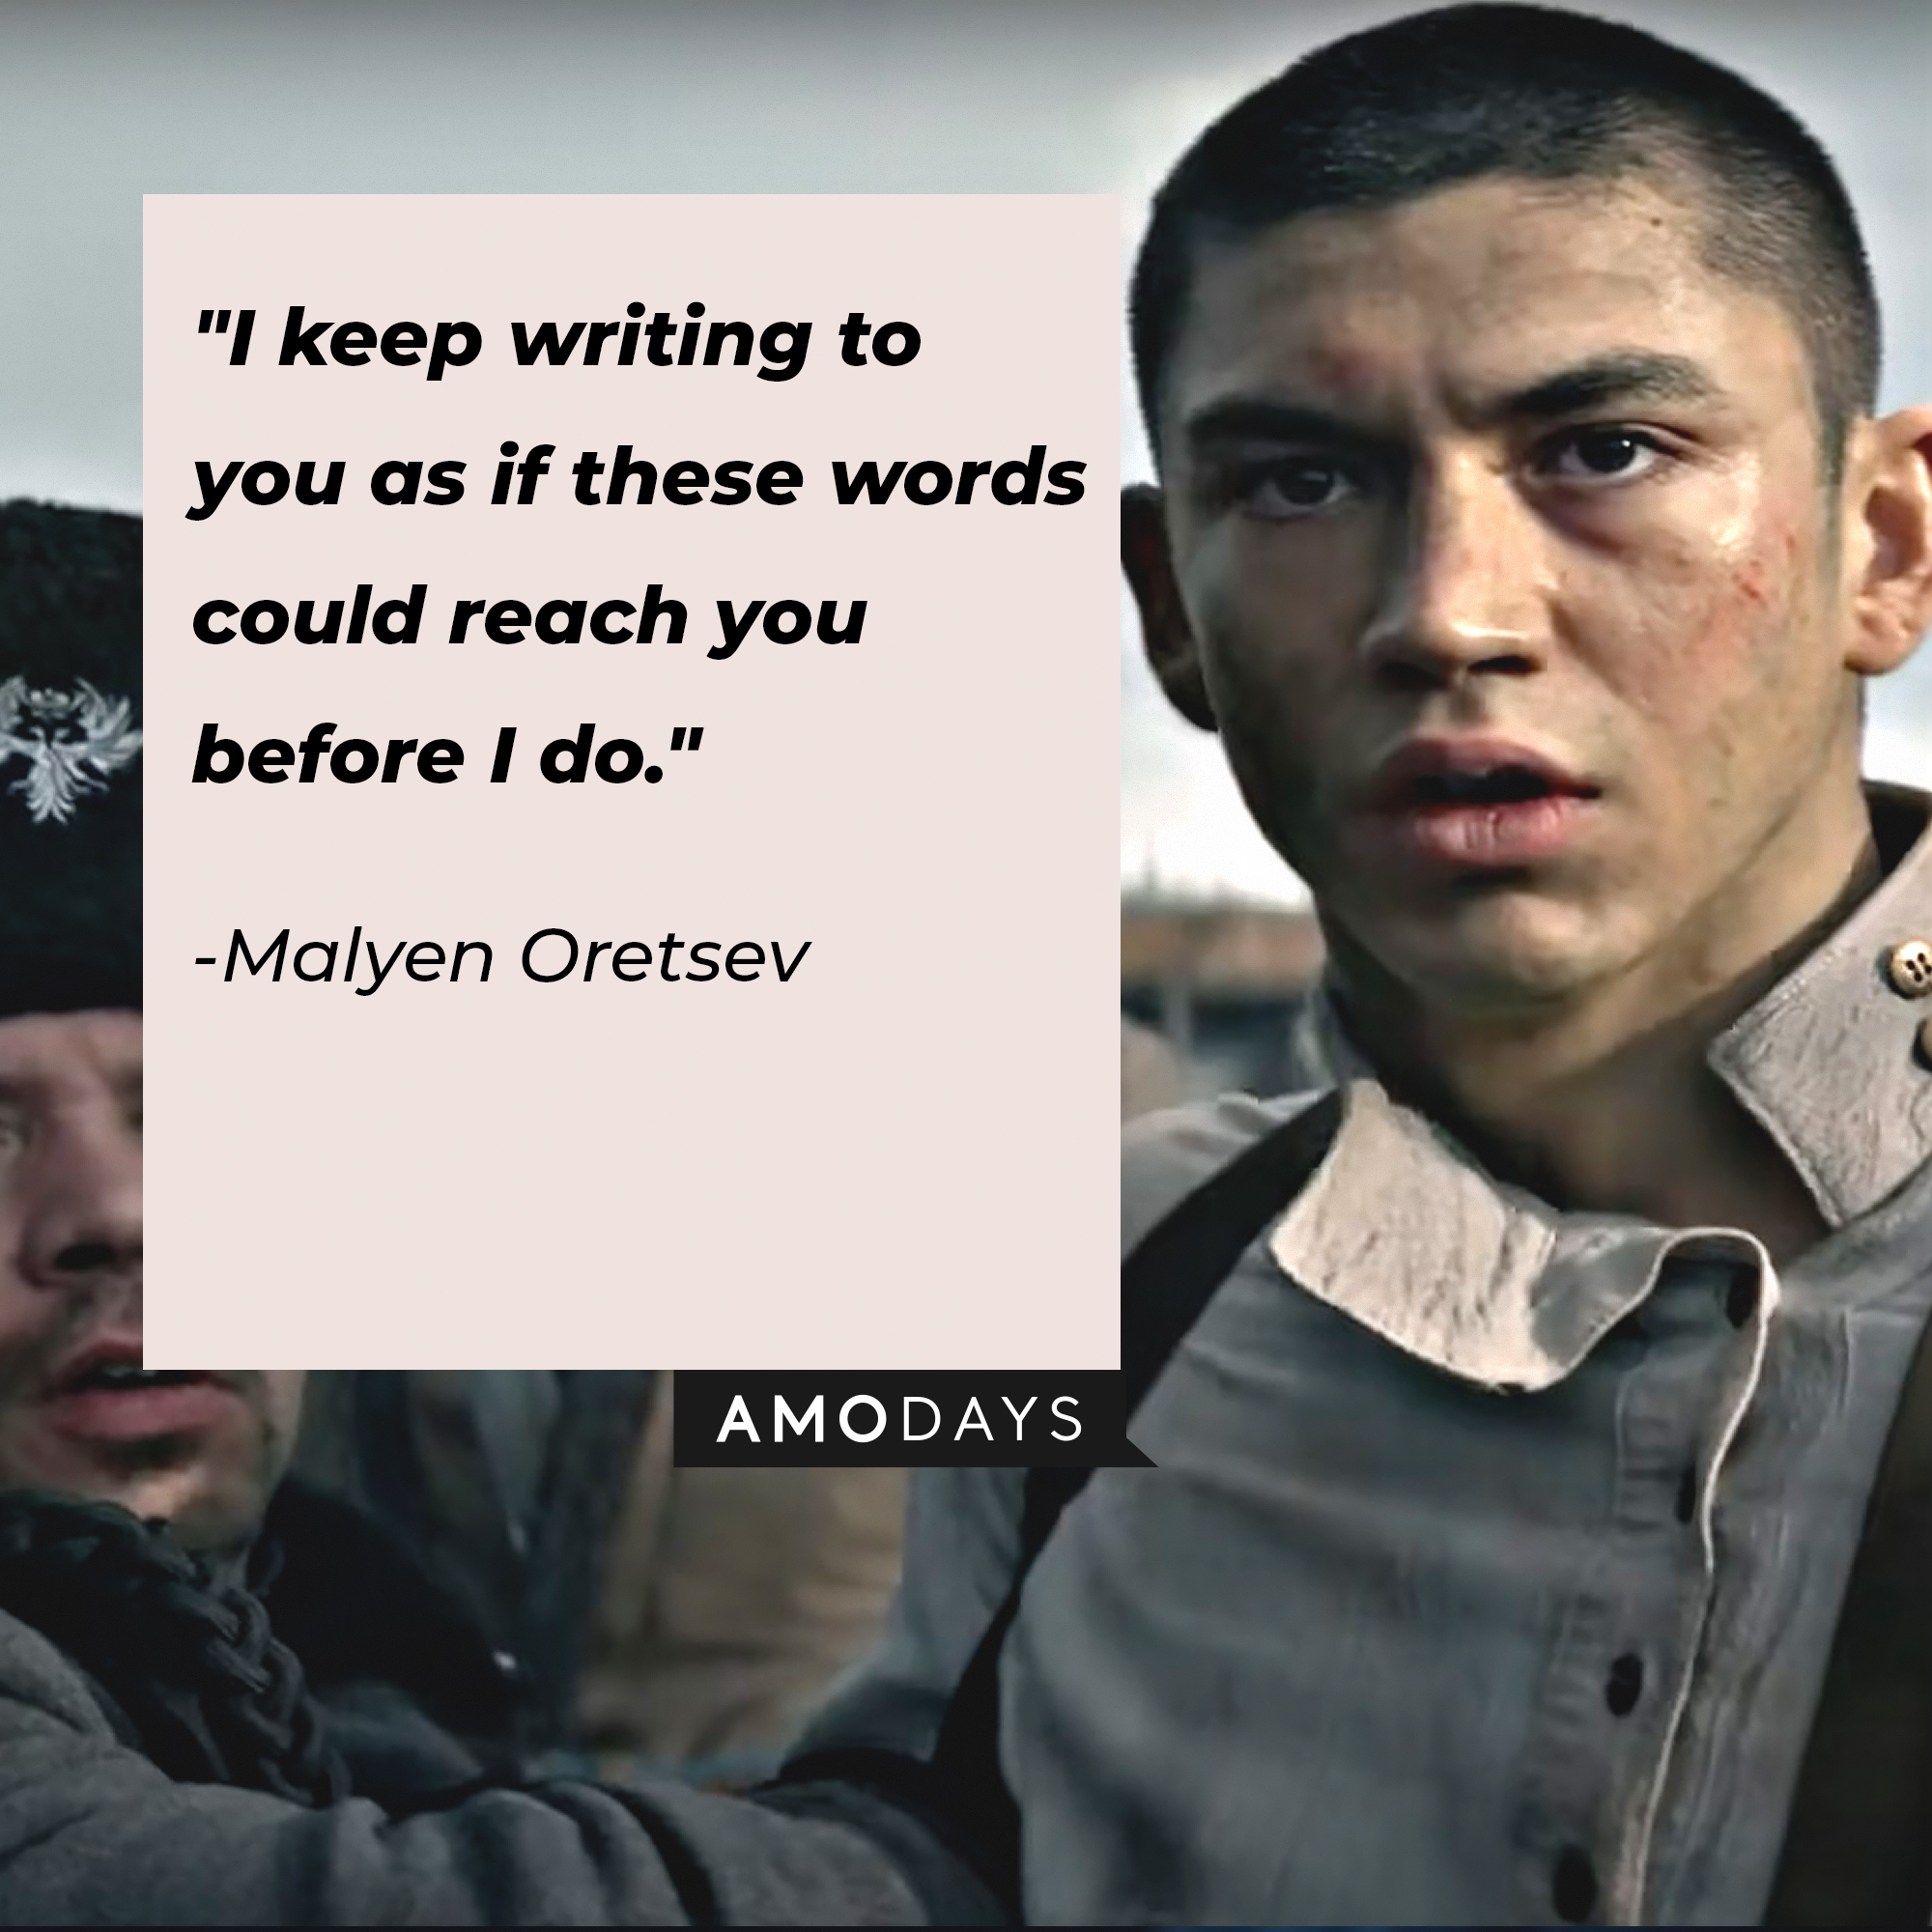 Malyen Oretsev's quote: "I keep writing to you as if these words could reach you before I do." | Image: AmoDays